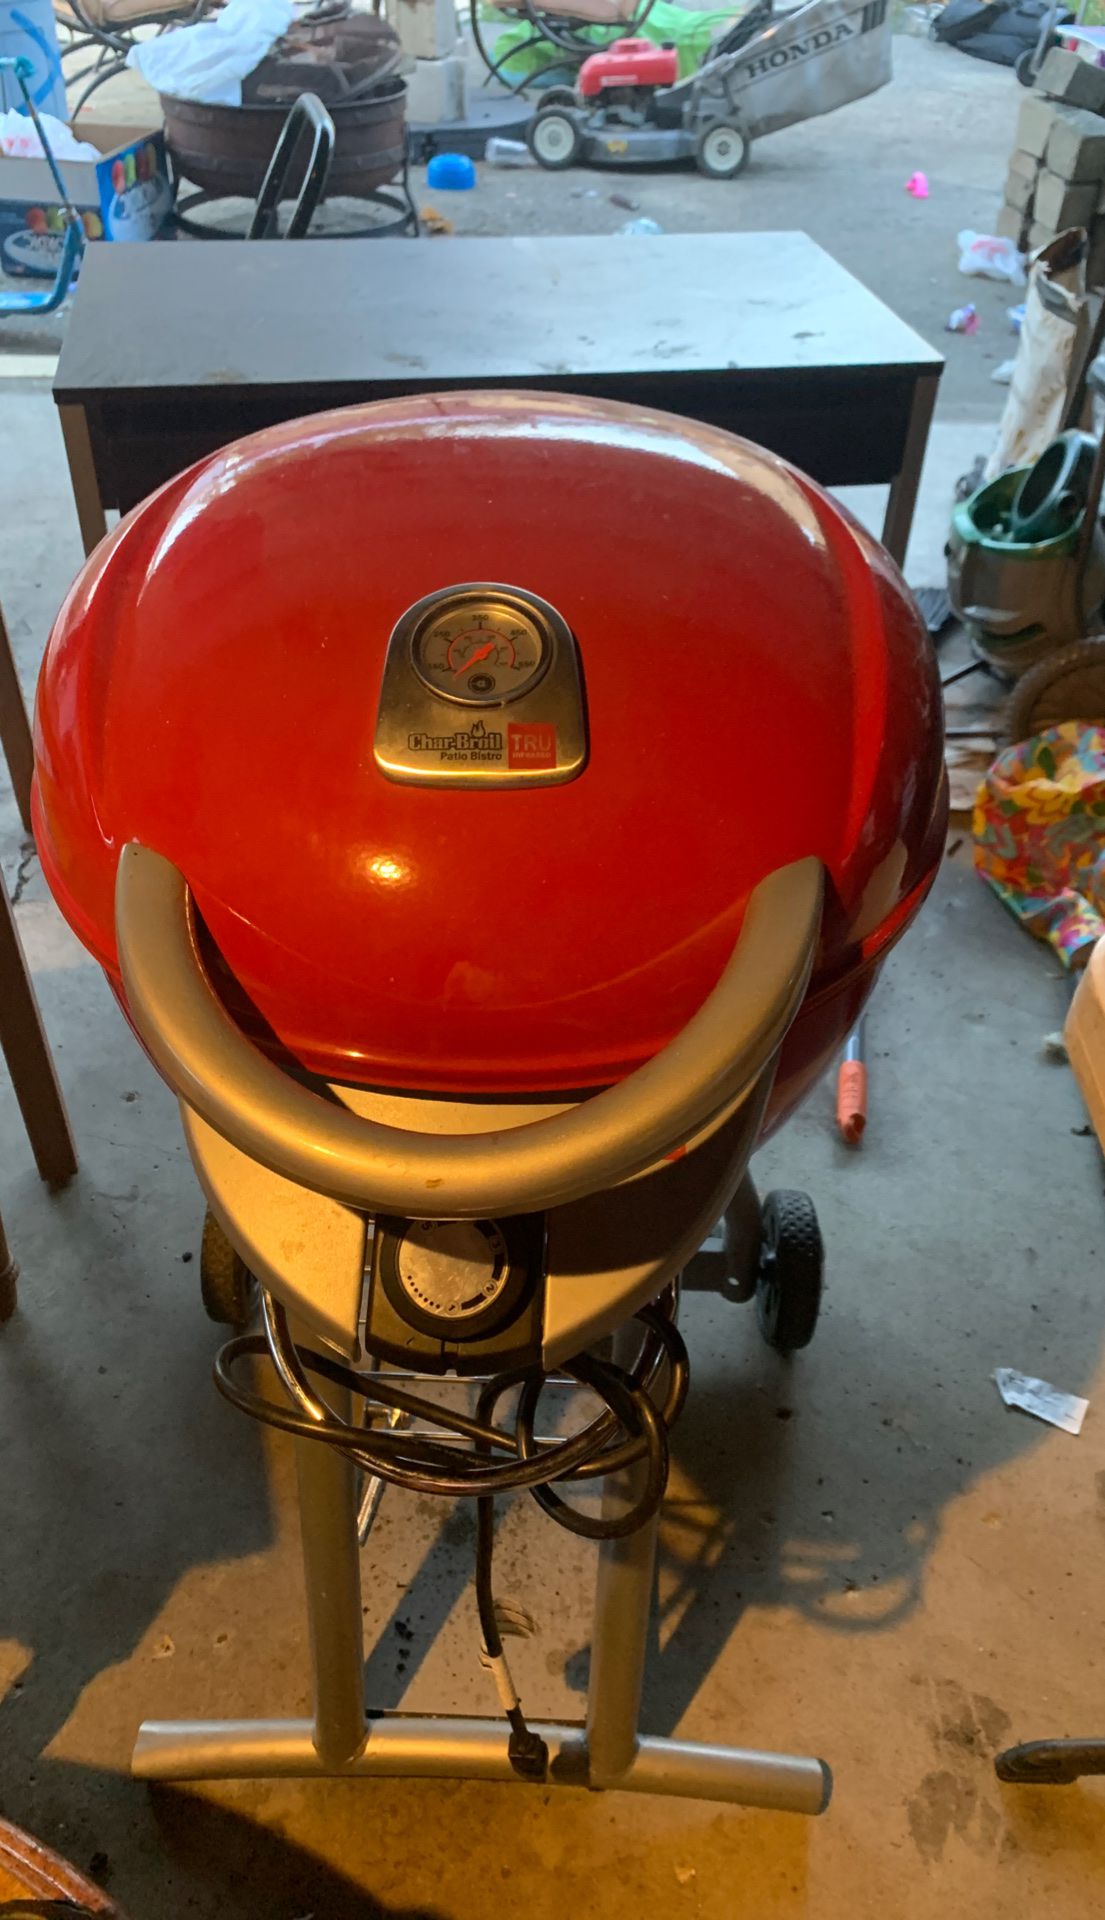 Electric bbq grill like new